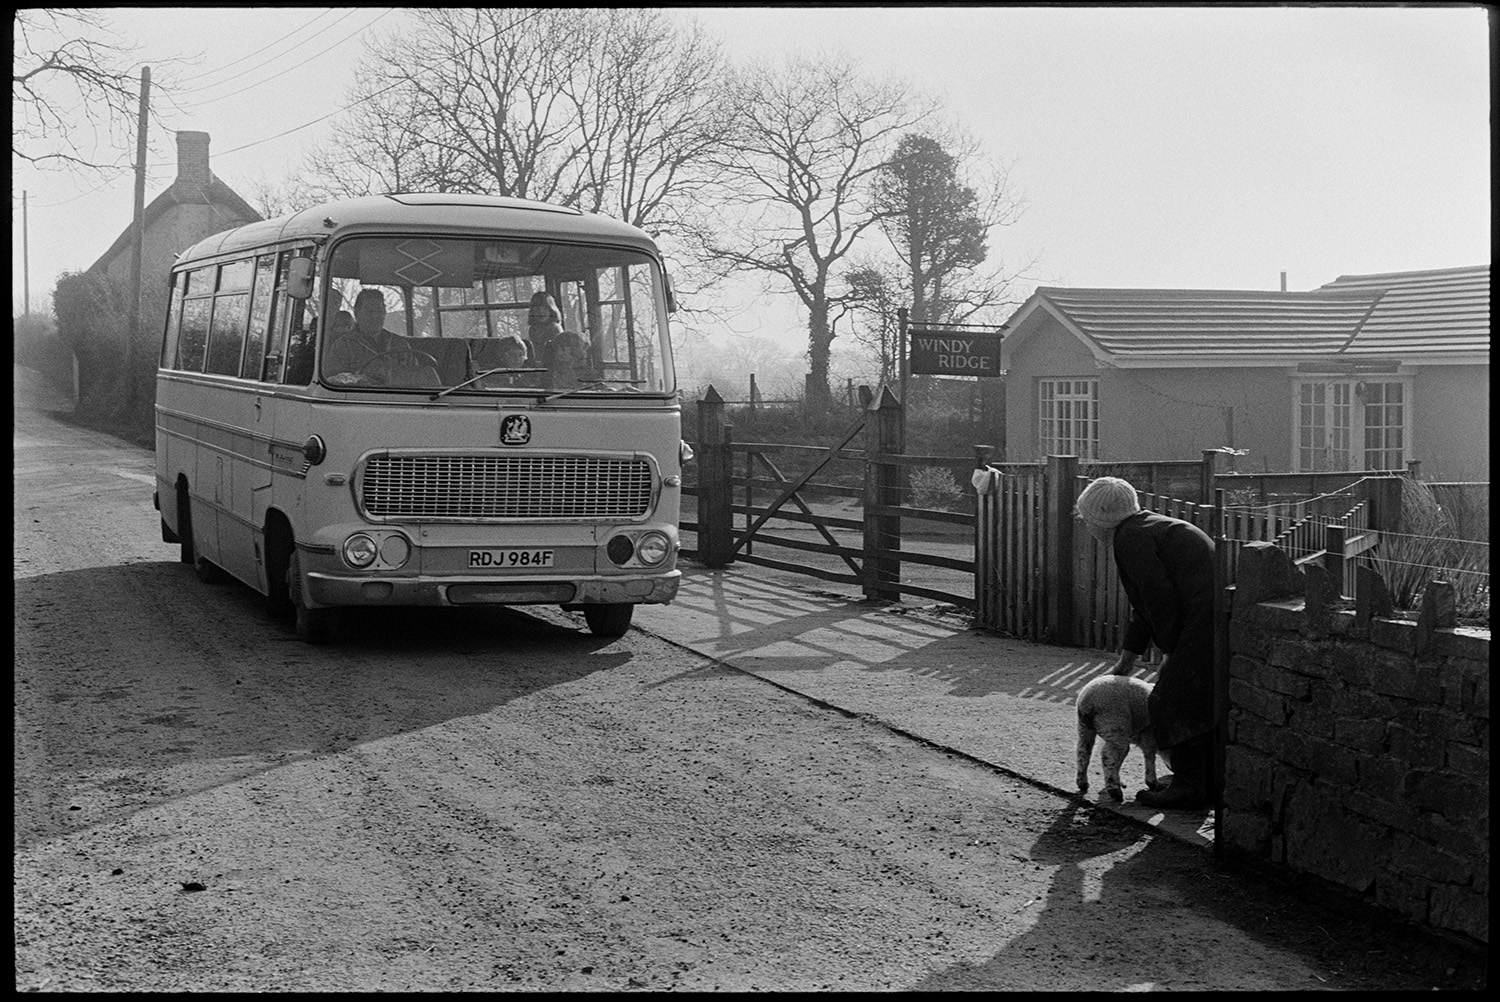 School bus, woman walking dogs. 
[The school bus picking up children outside Windy Ridge at Upcott, Dolton. Evelyn Folland is stood by the side of the road with a lamb.]